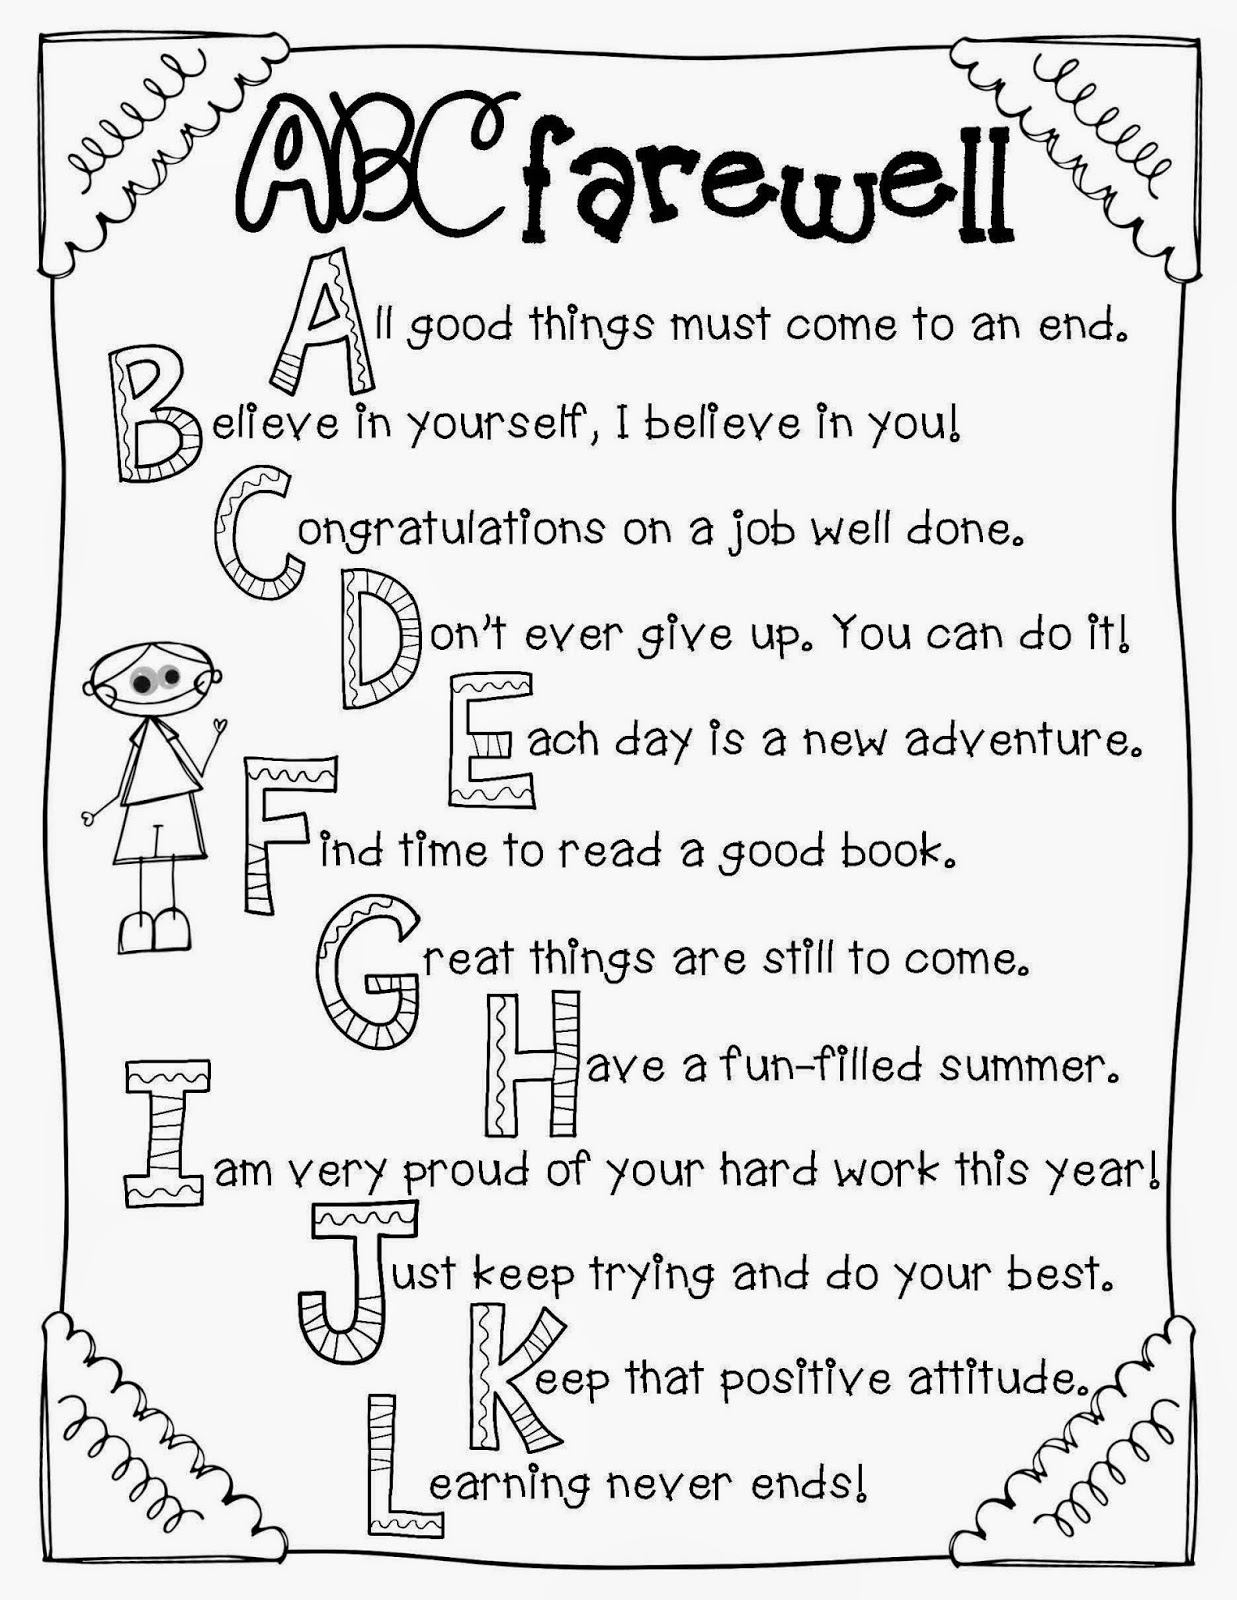 ABC Farewell printable, with a short note about the past school year for each letter